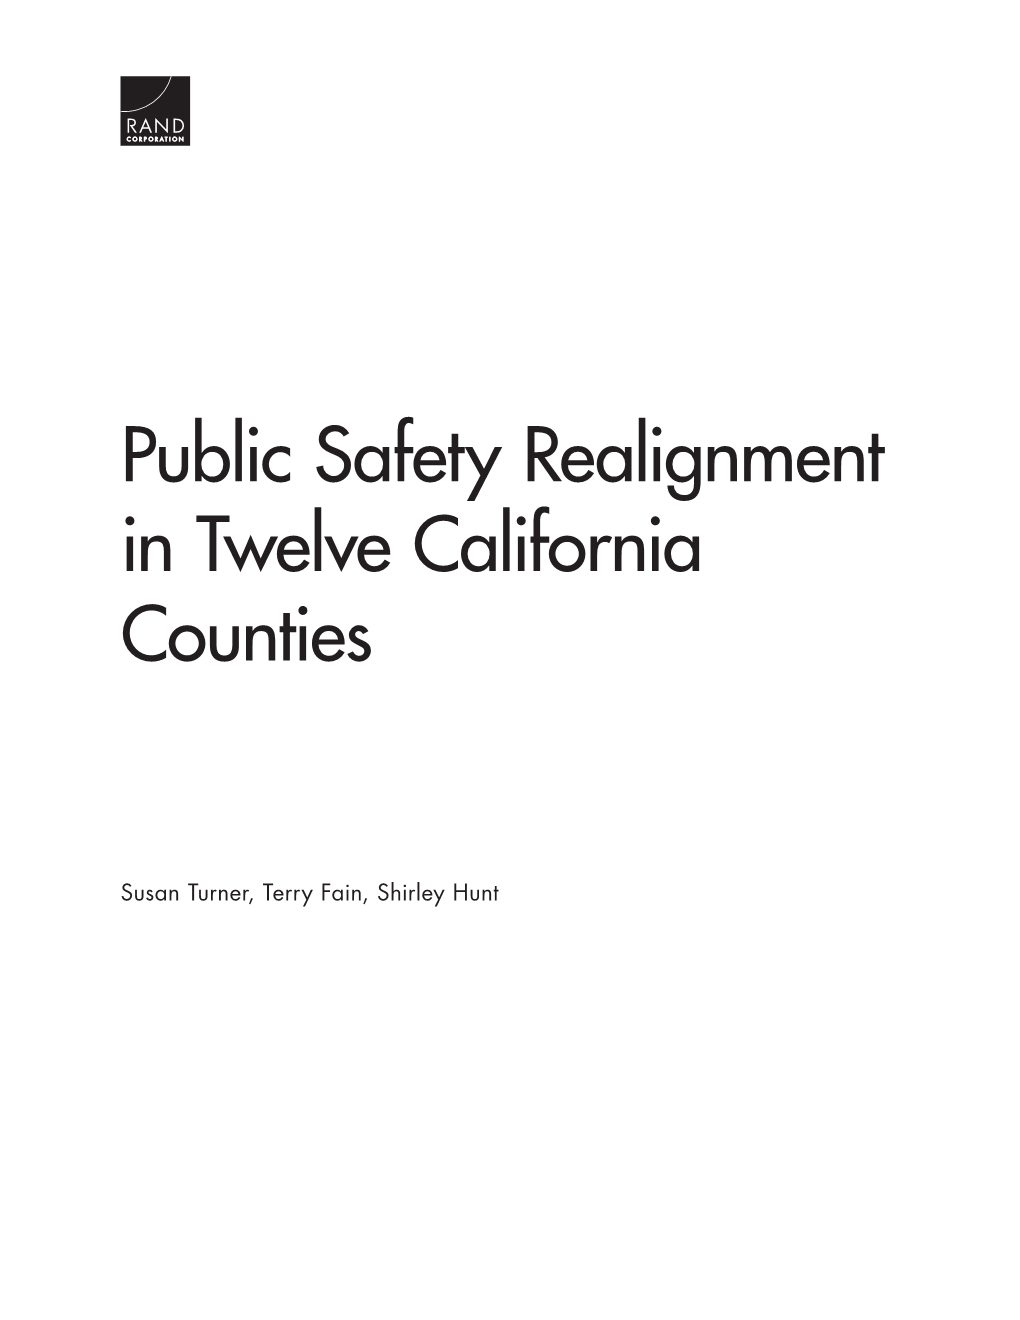 Public Safety Realignment in Twelve California Counties